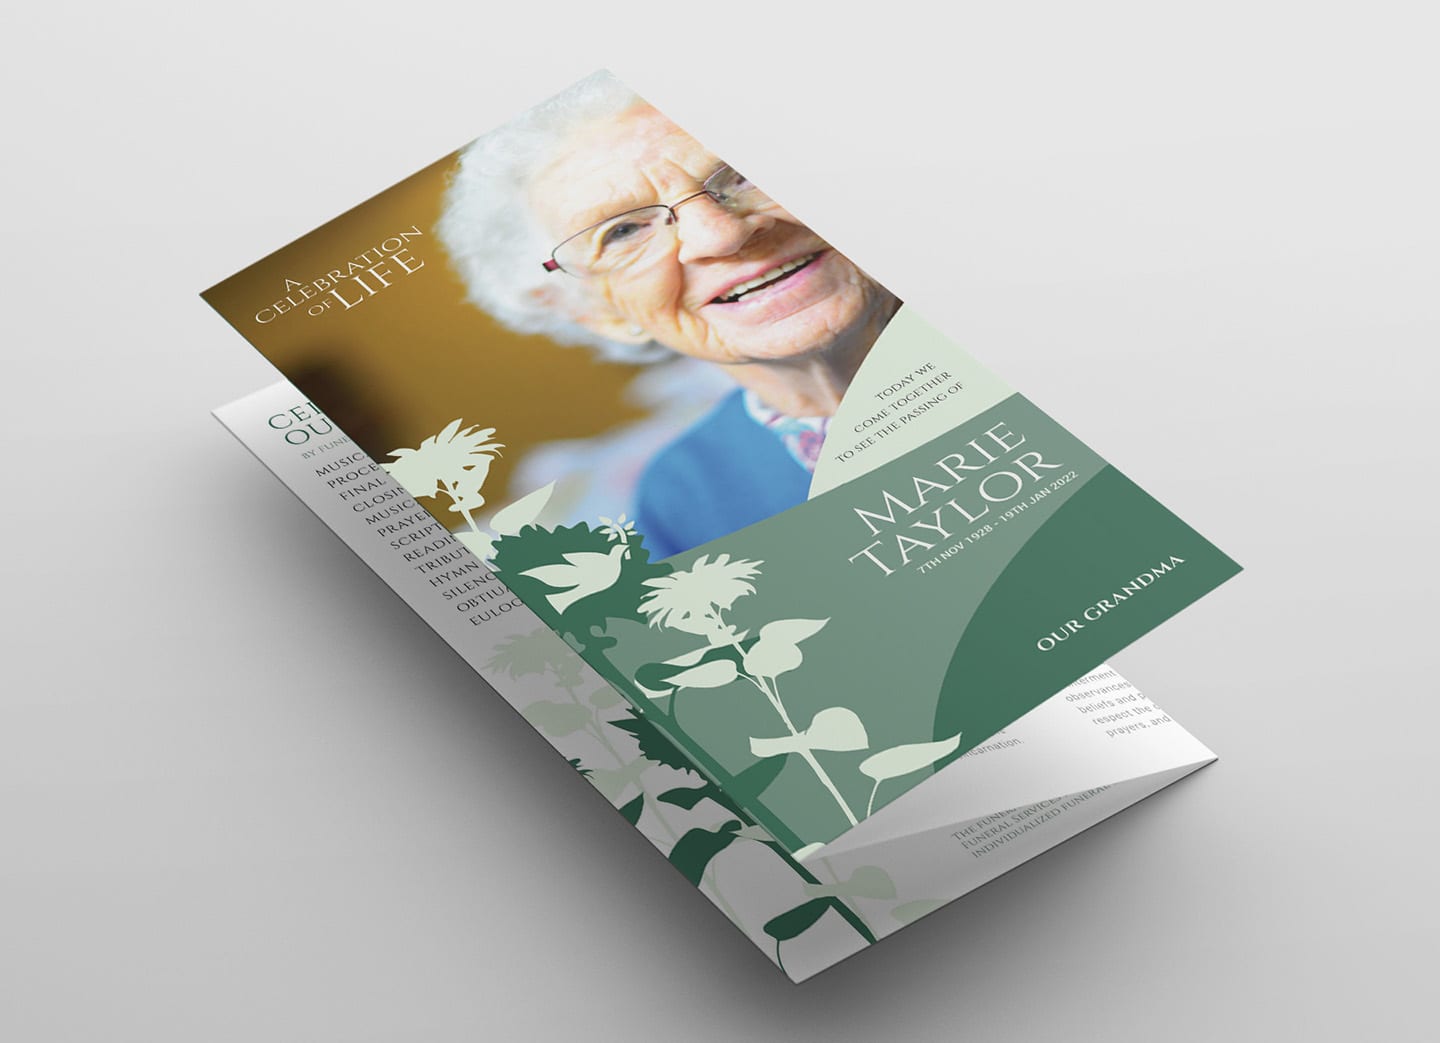 Funeral Flyer Template